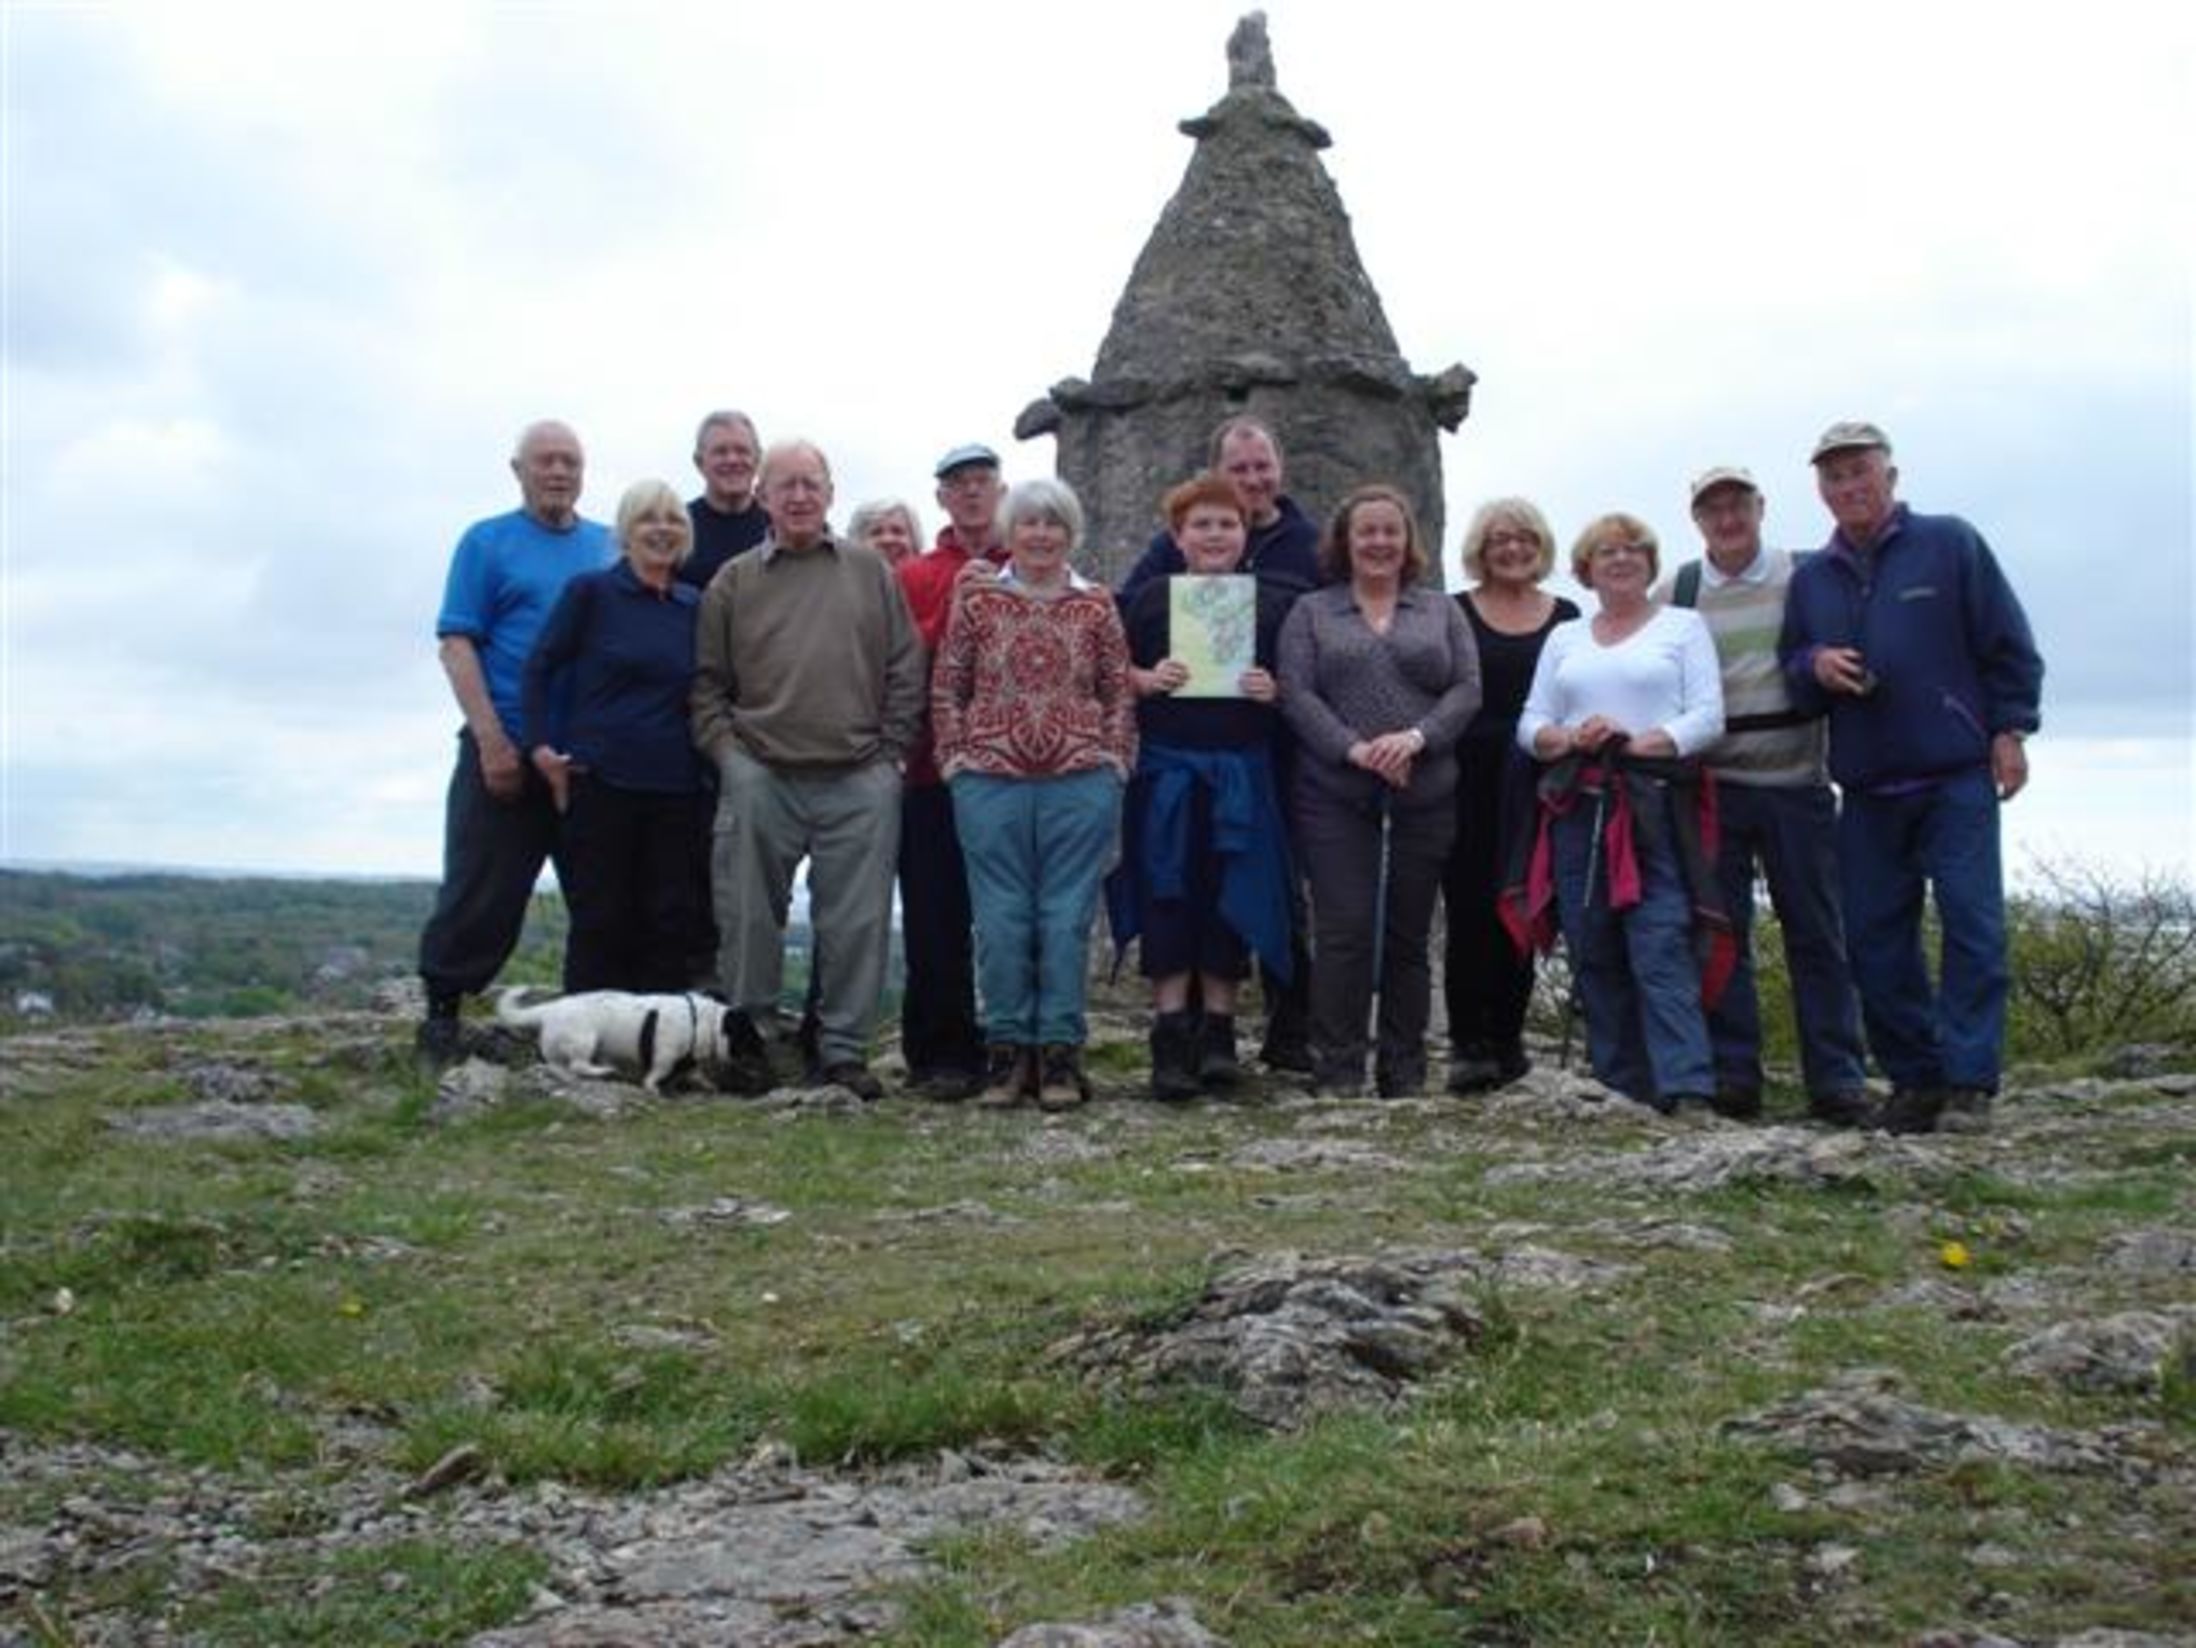 13-05-19 Team Photo at The Pepper Pot (Small)